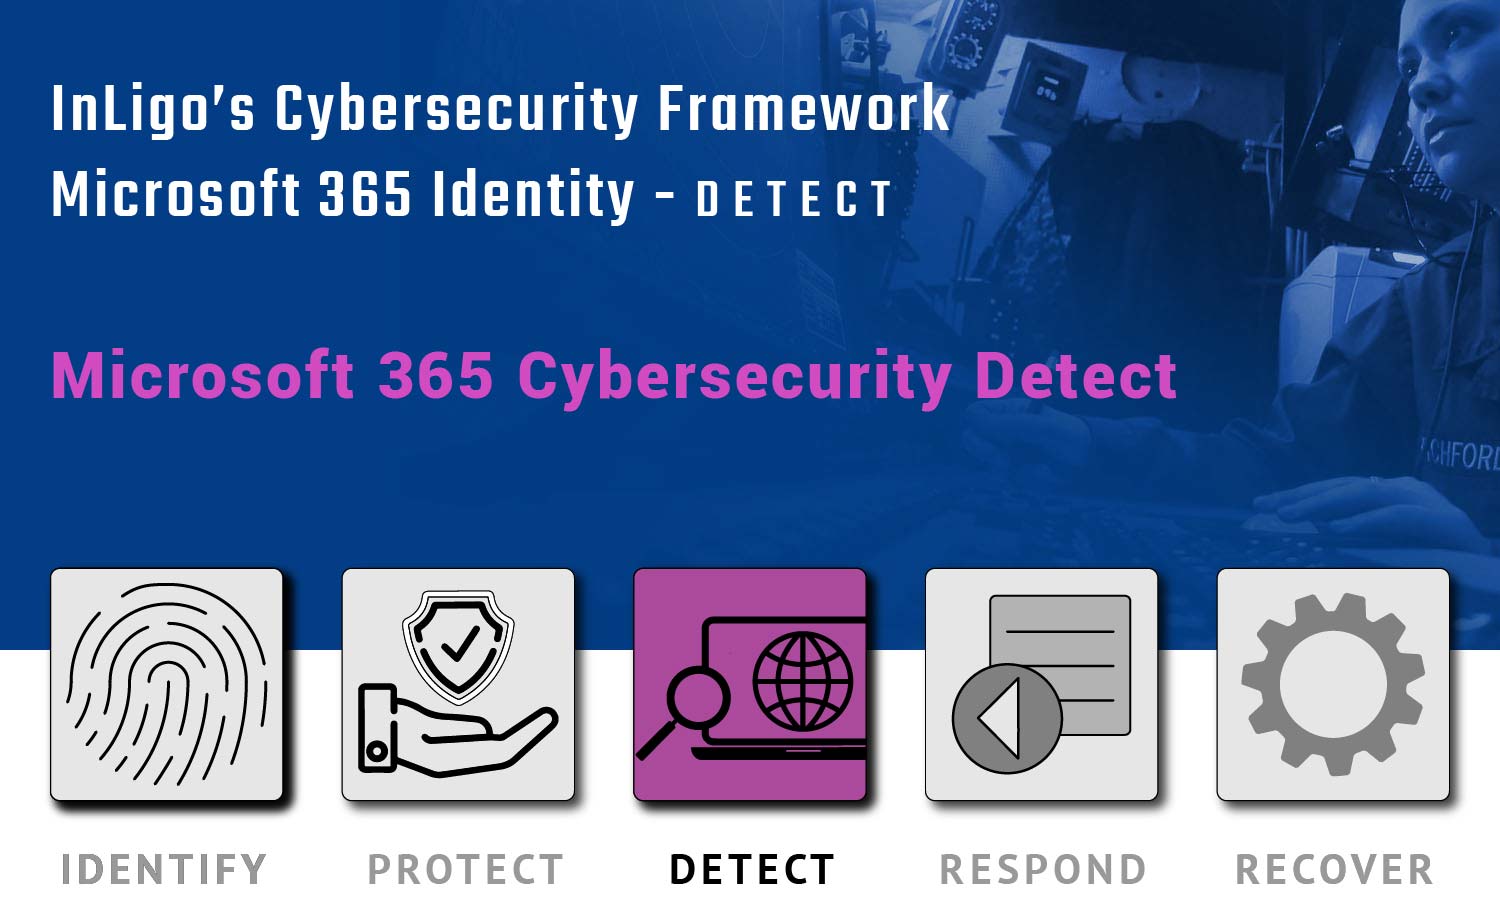 Microsoft 365 Cybersecurity Detect